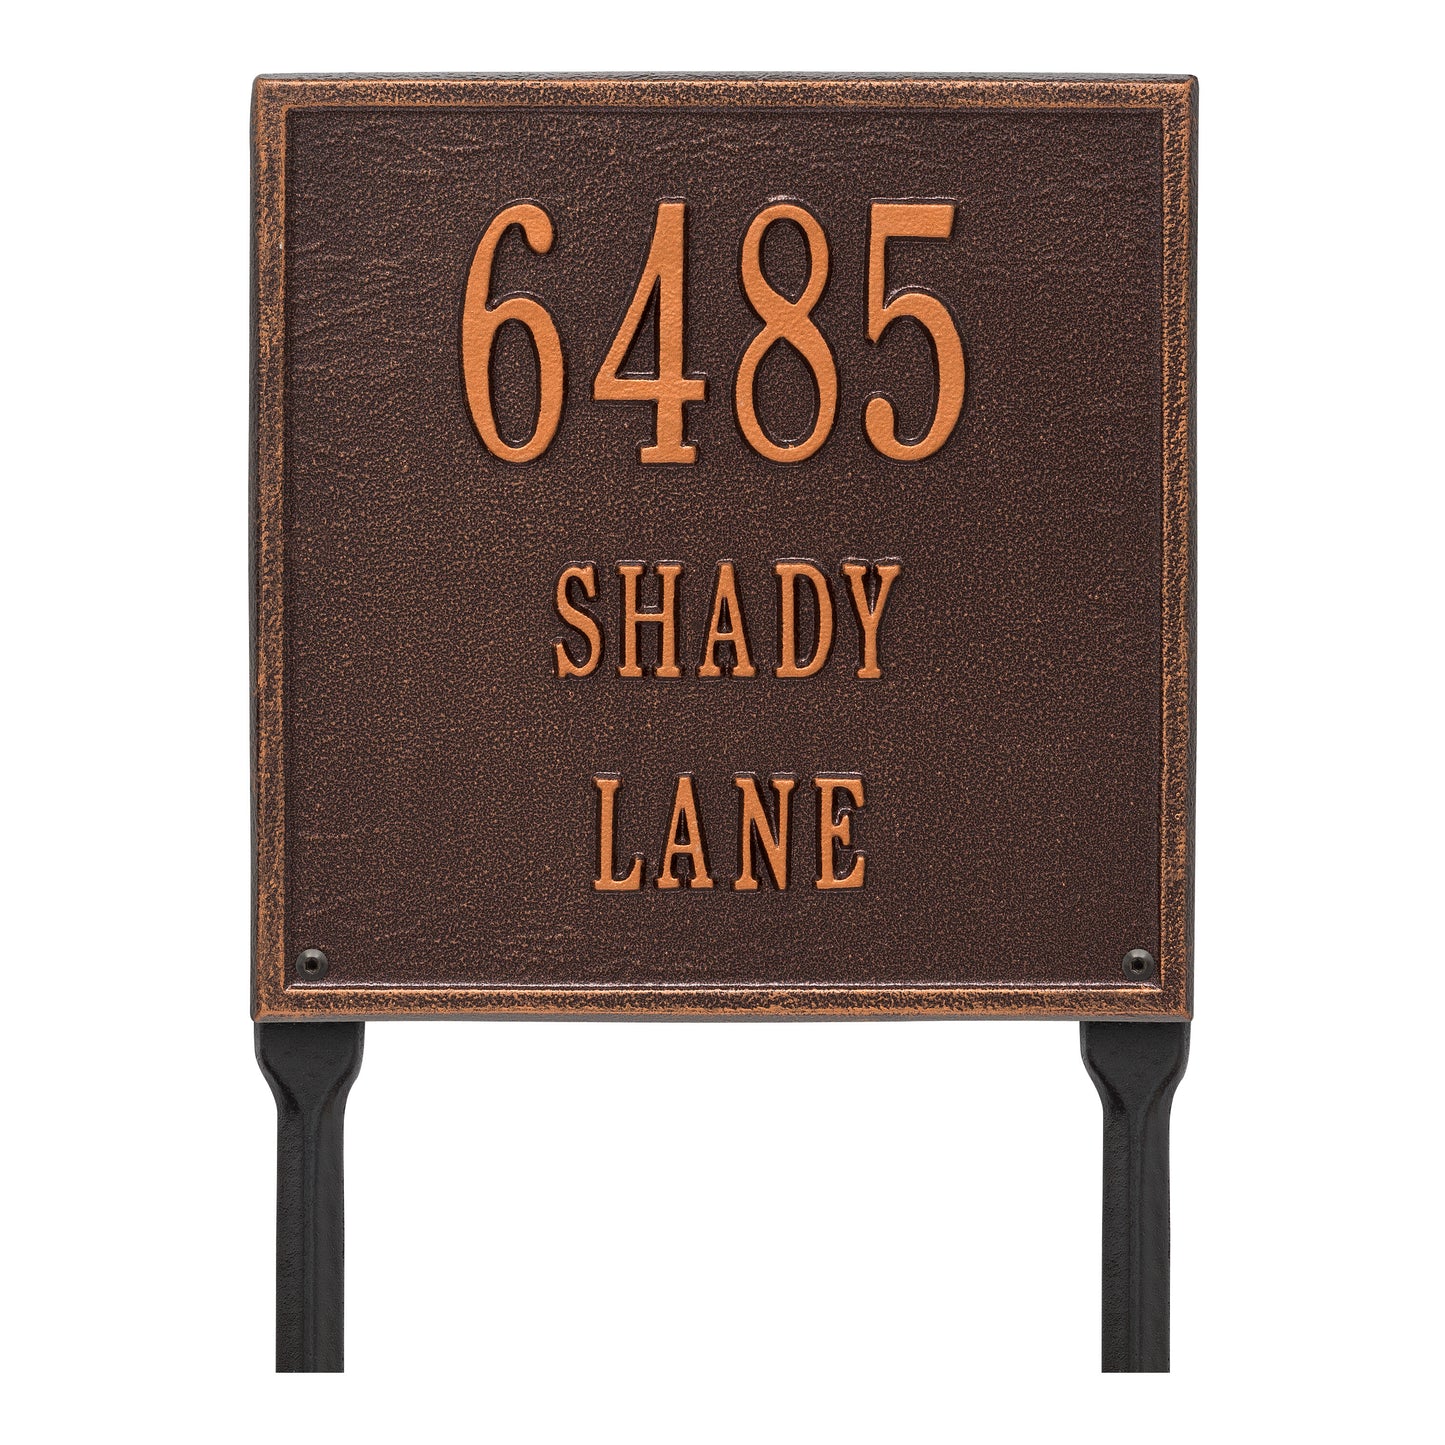 Whitehall Products Personalized Square Standard Lawn Plaque Three Line Black/gold